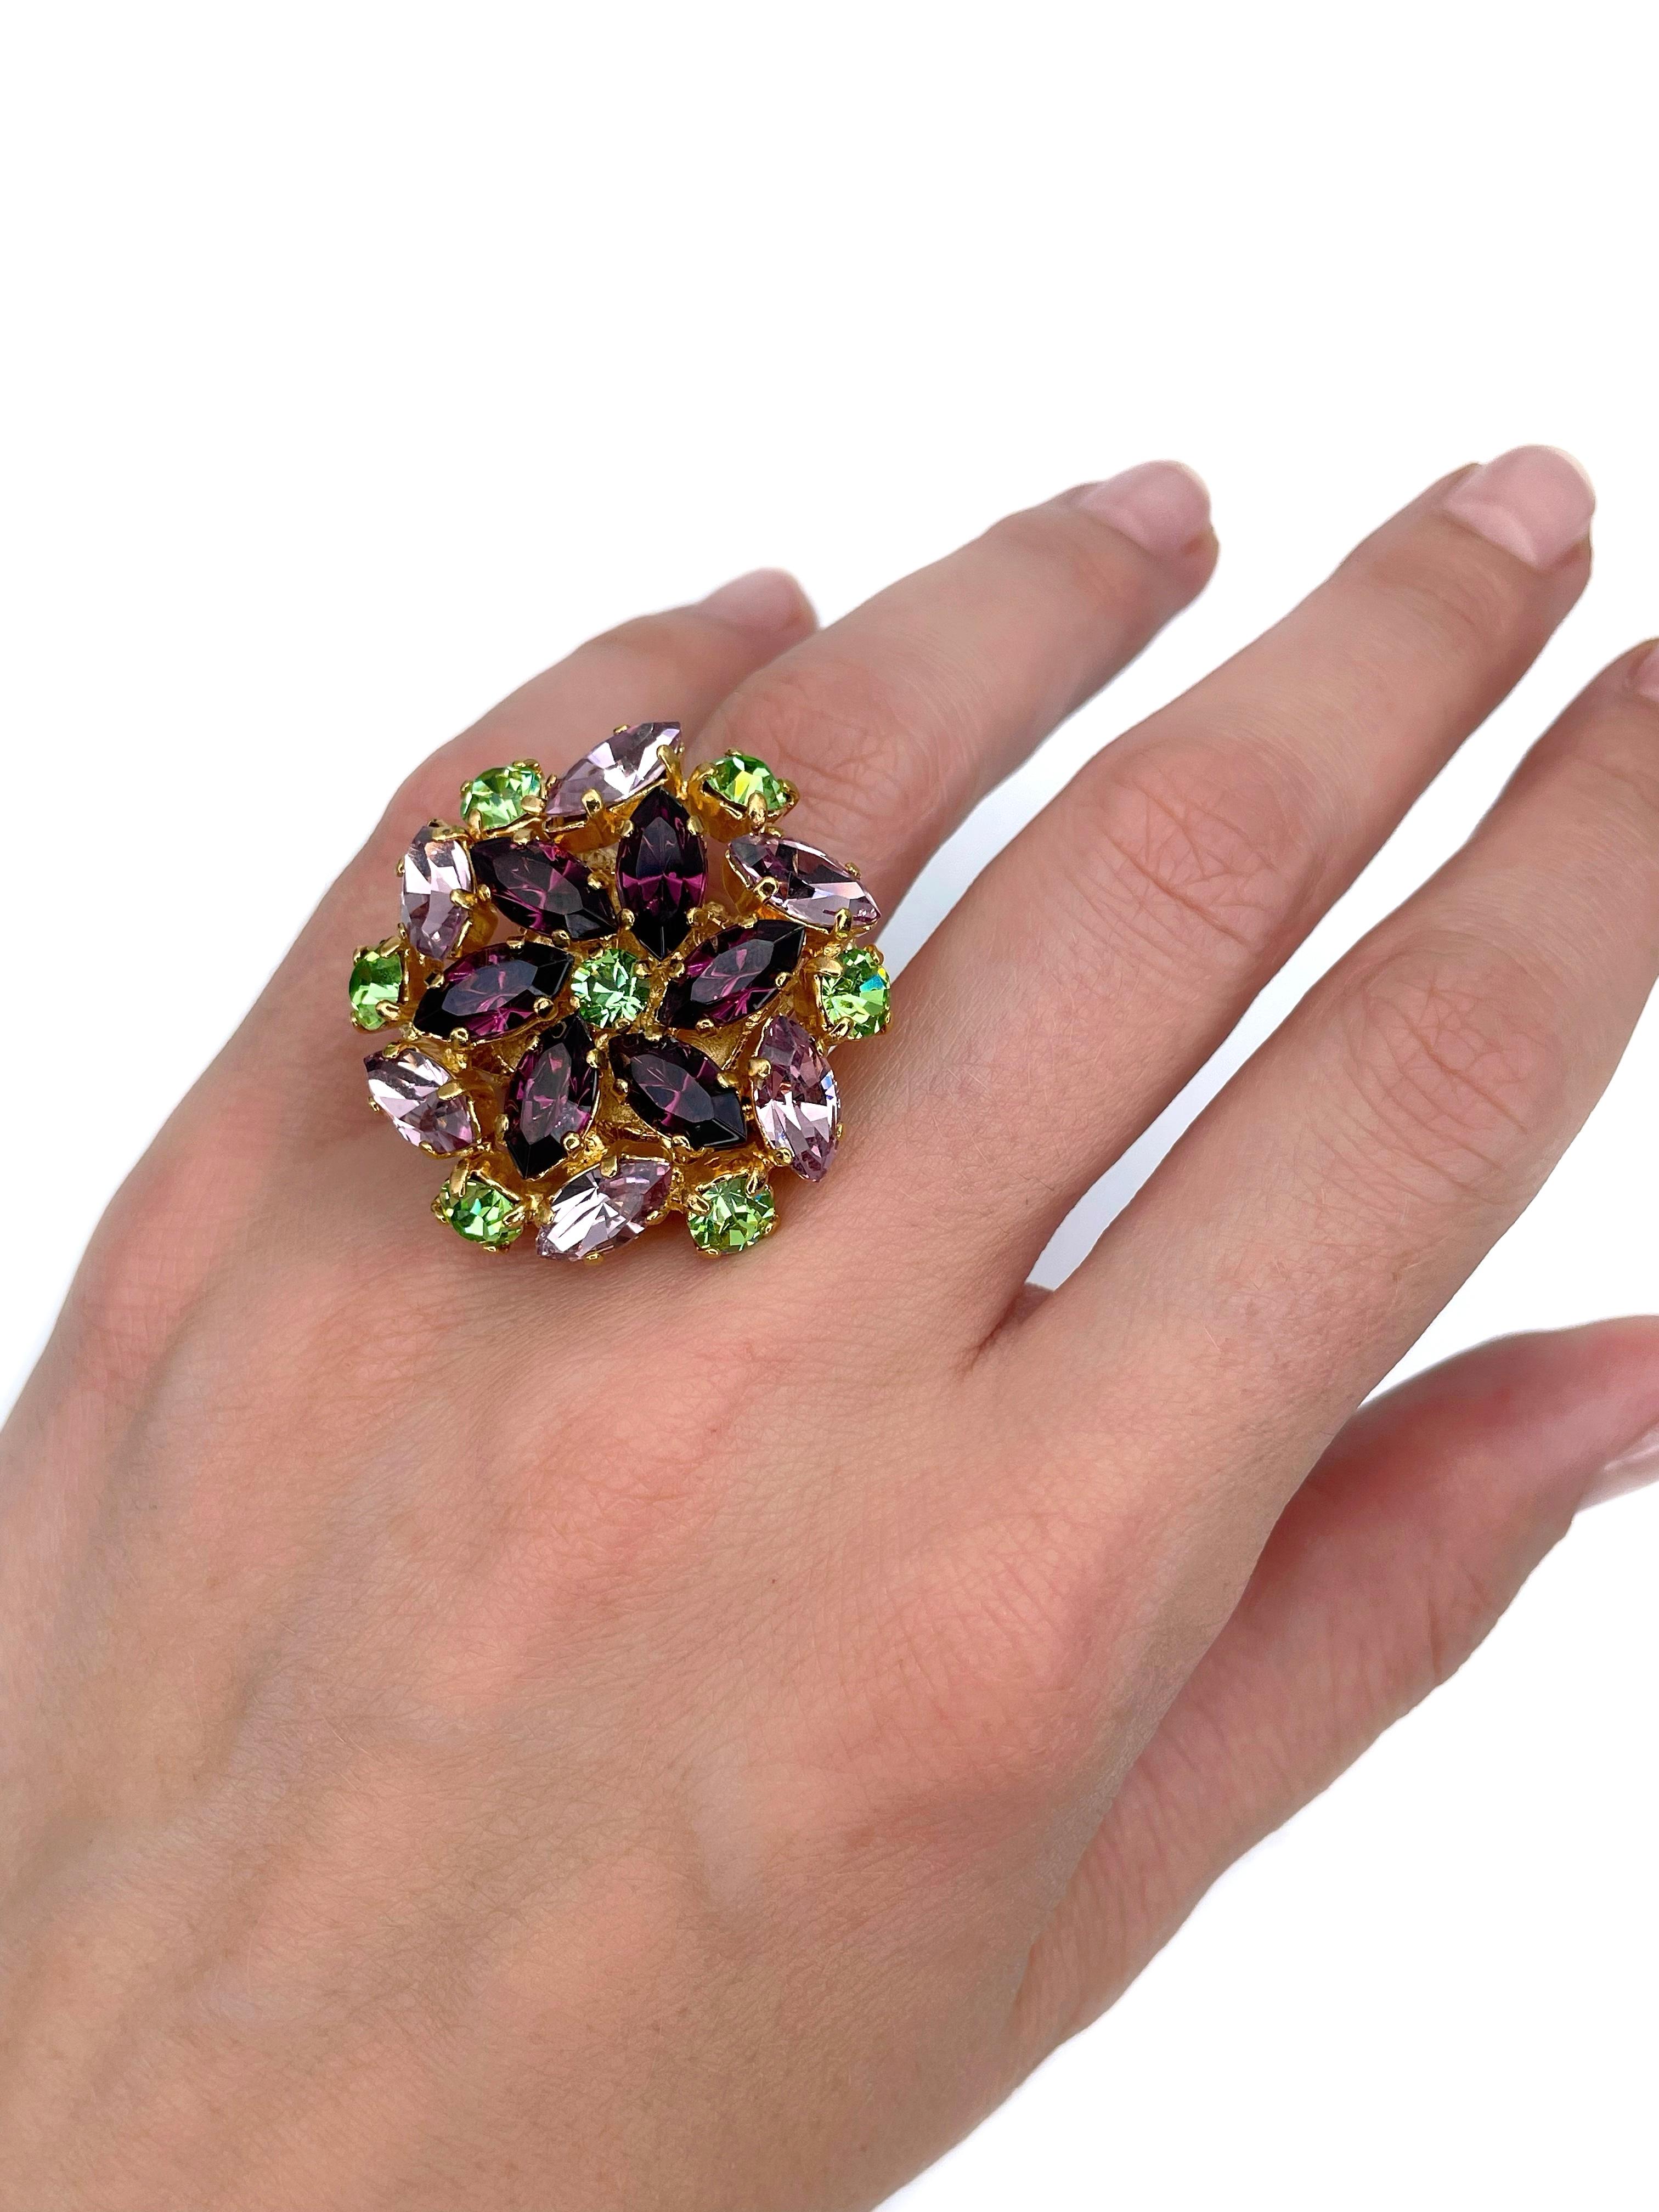 This is a stunning vintage floral cocktail ring designed by YSL in 1980s. The piece is crafted in gold tone metal. It features purple, green and pink shiny crystals. 

Signed: “Yves Saint Laurent. 5” (shown in photos).

Size: 16.25 (US 5.5)

———

If